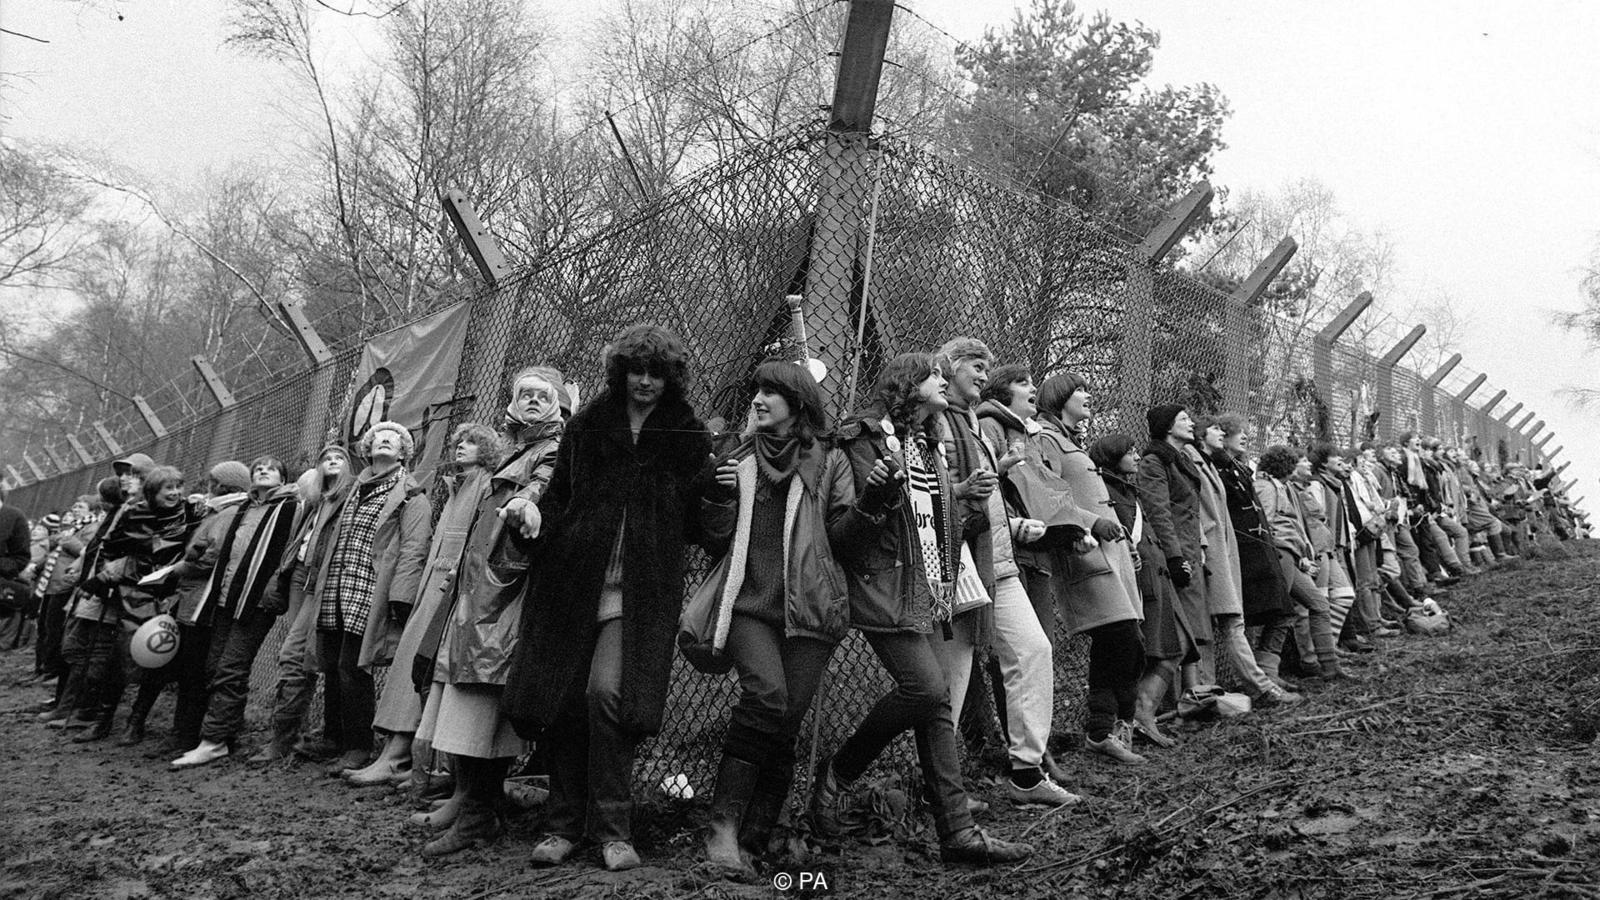 1981, 36 women chained themselves to a fence at a US military airbase in Berkshire, England. They were protesting the decision of the British government to allow nuclear cruise missiles to be sited at RAF Greenham Common